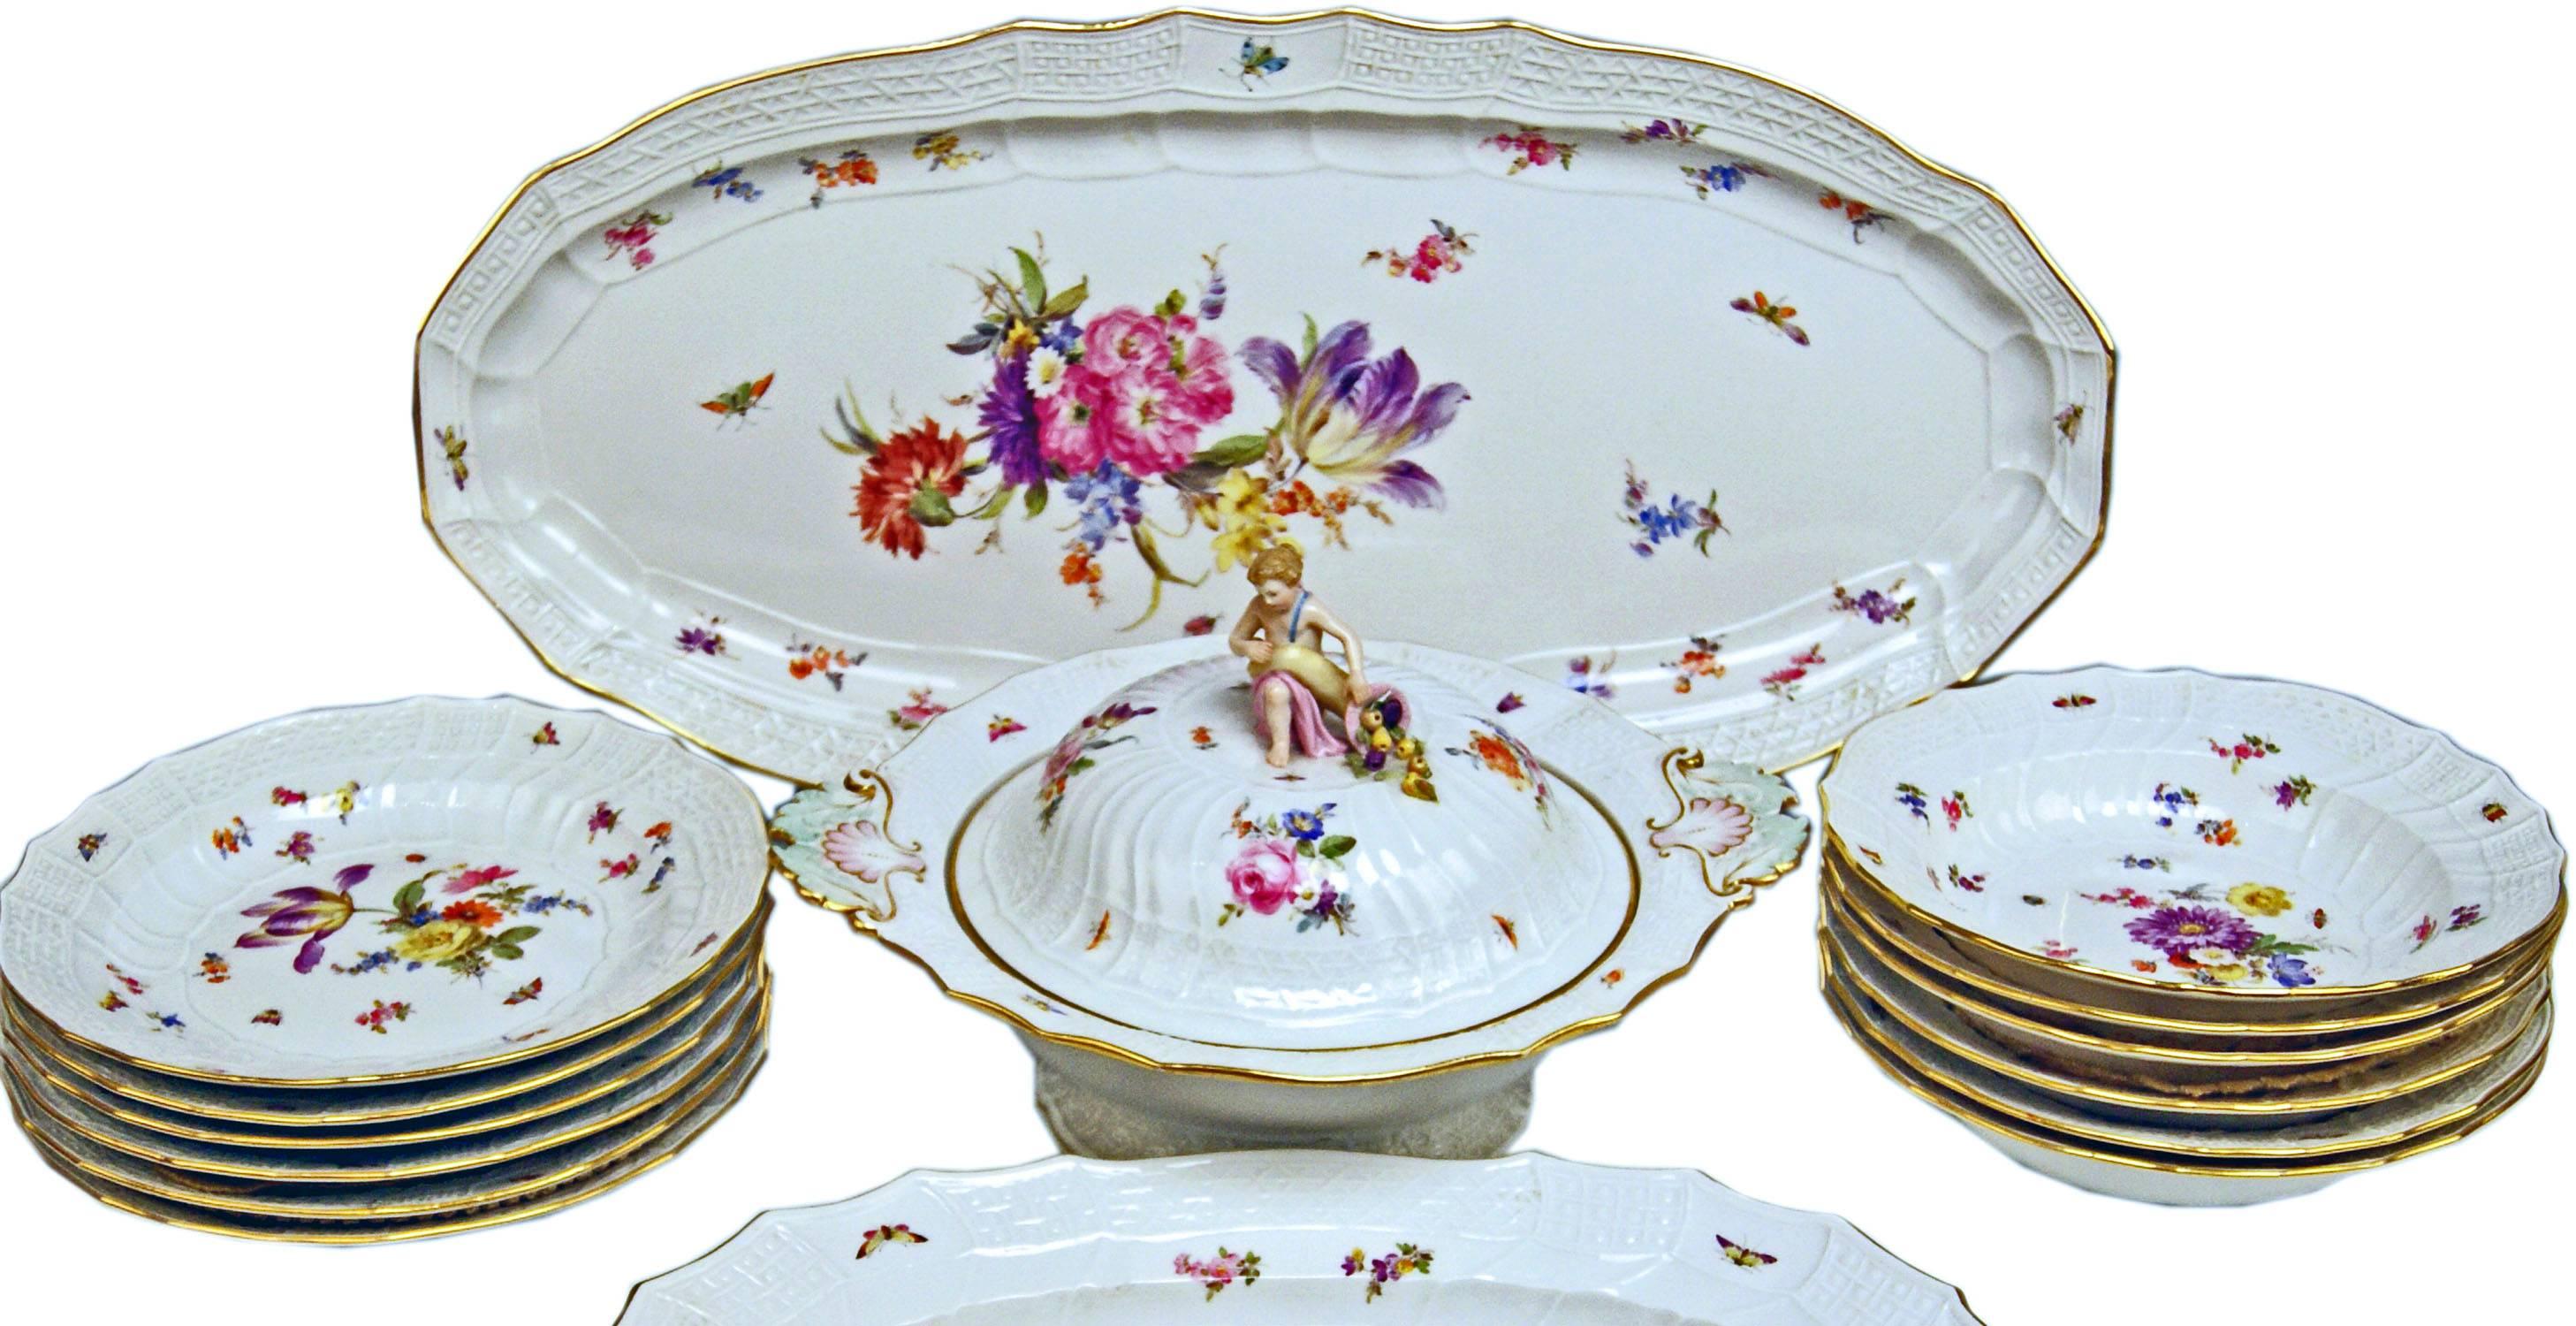 We invite you here to look at a SPLENDID Meissen Dinner Set for six persons consisting of 15 pieces:
White porcelain, multicolored painted with nicest flower pattern, golden painted edges existing.
Decoration type and form:   